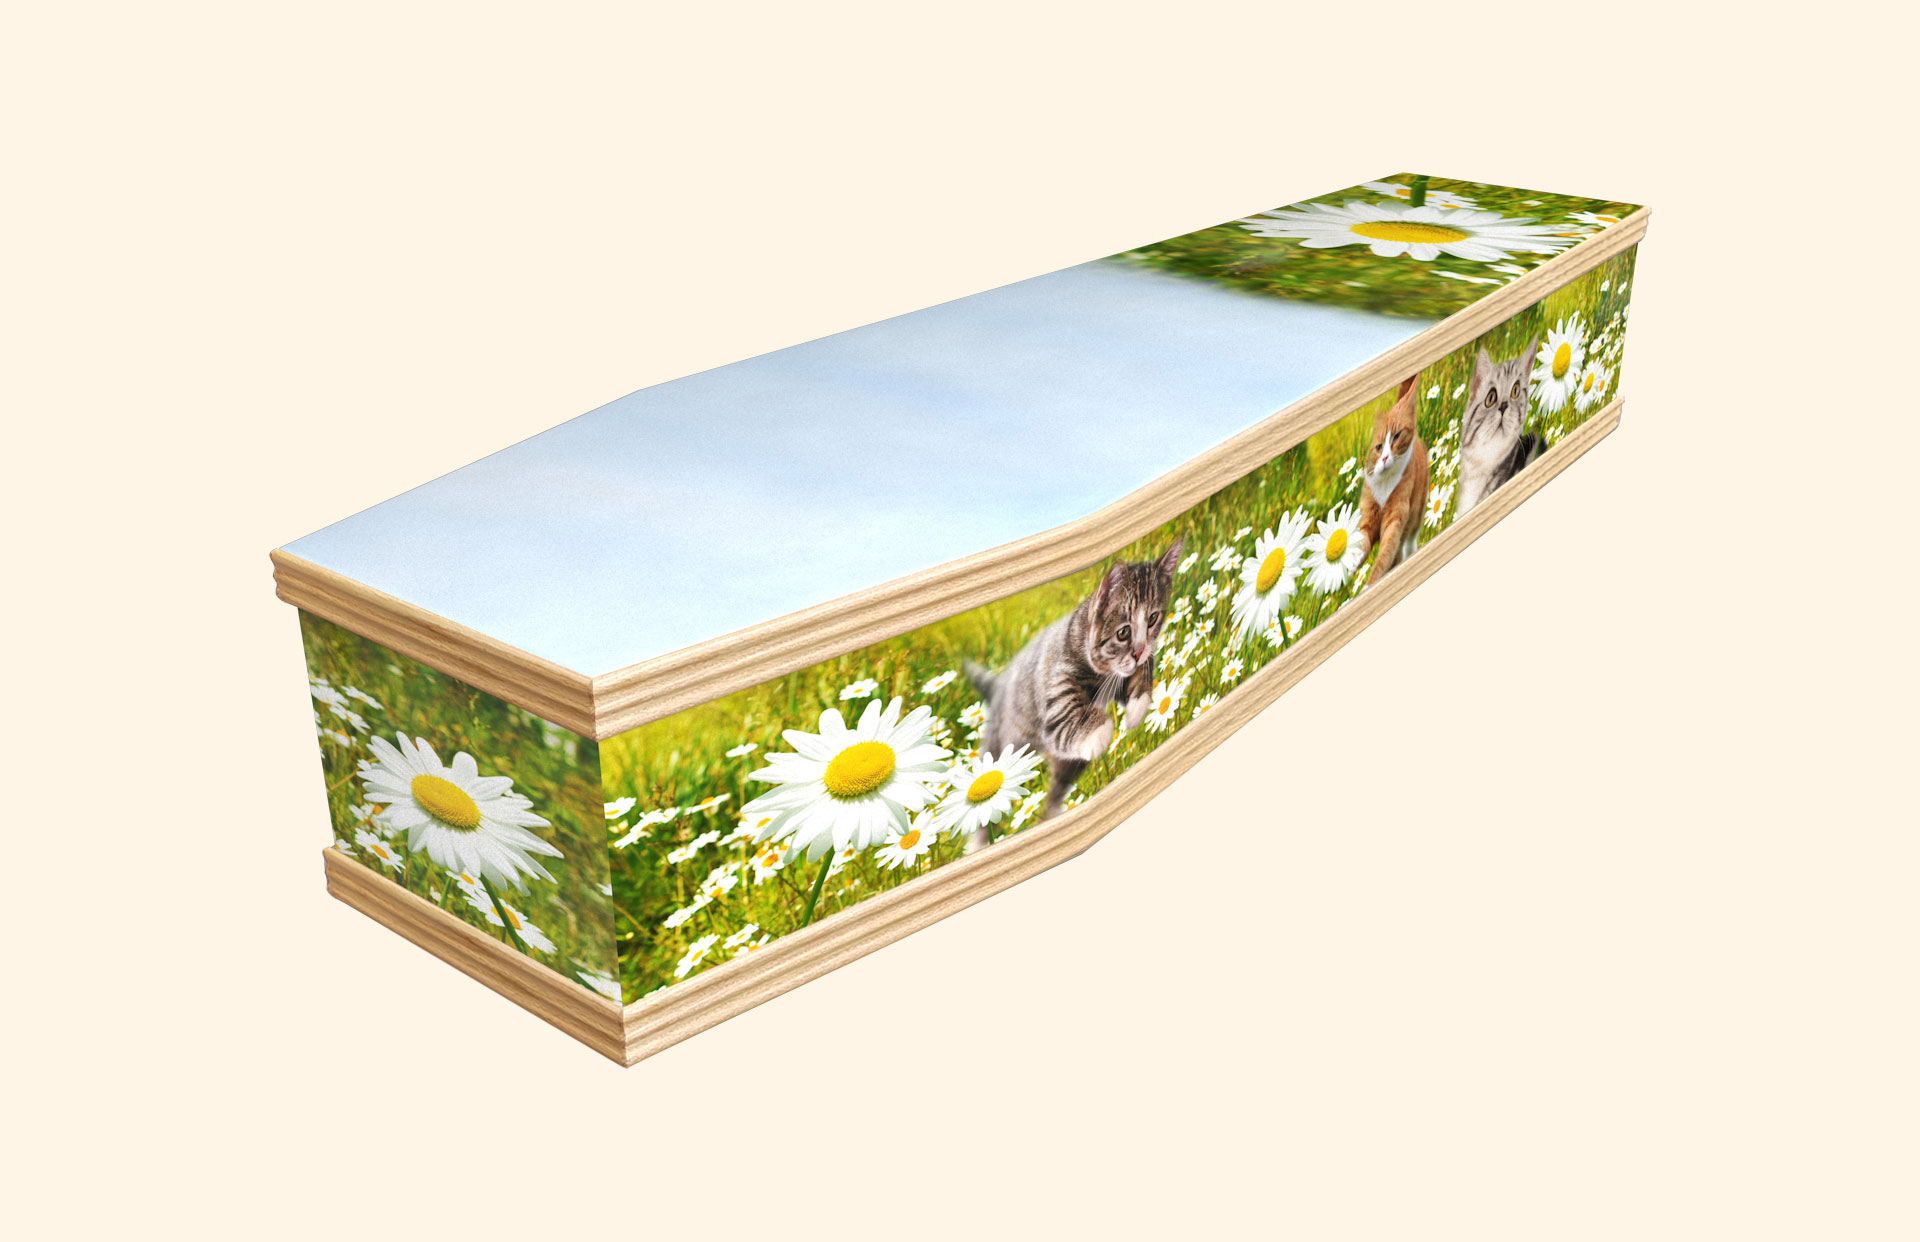 Purrfect Daisy design on a classic coffin